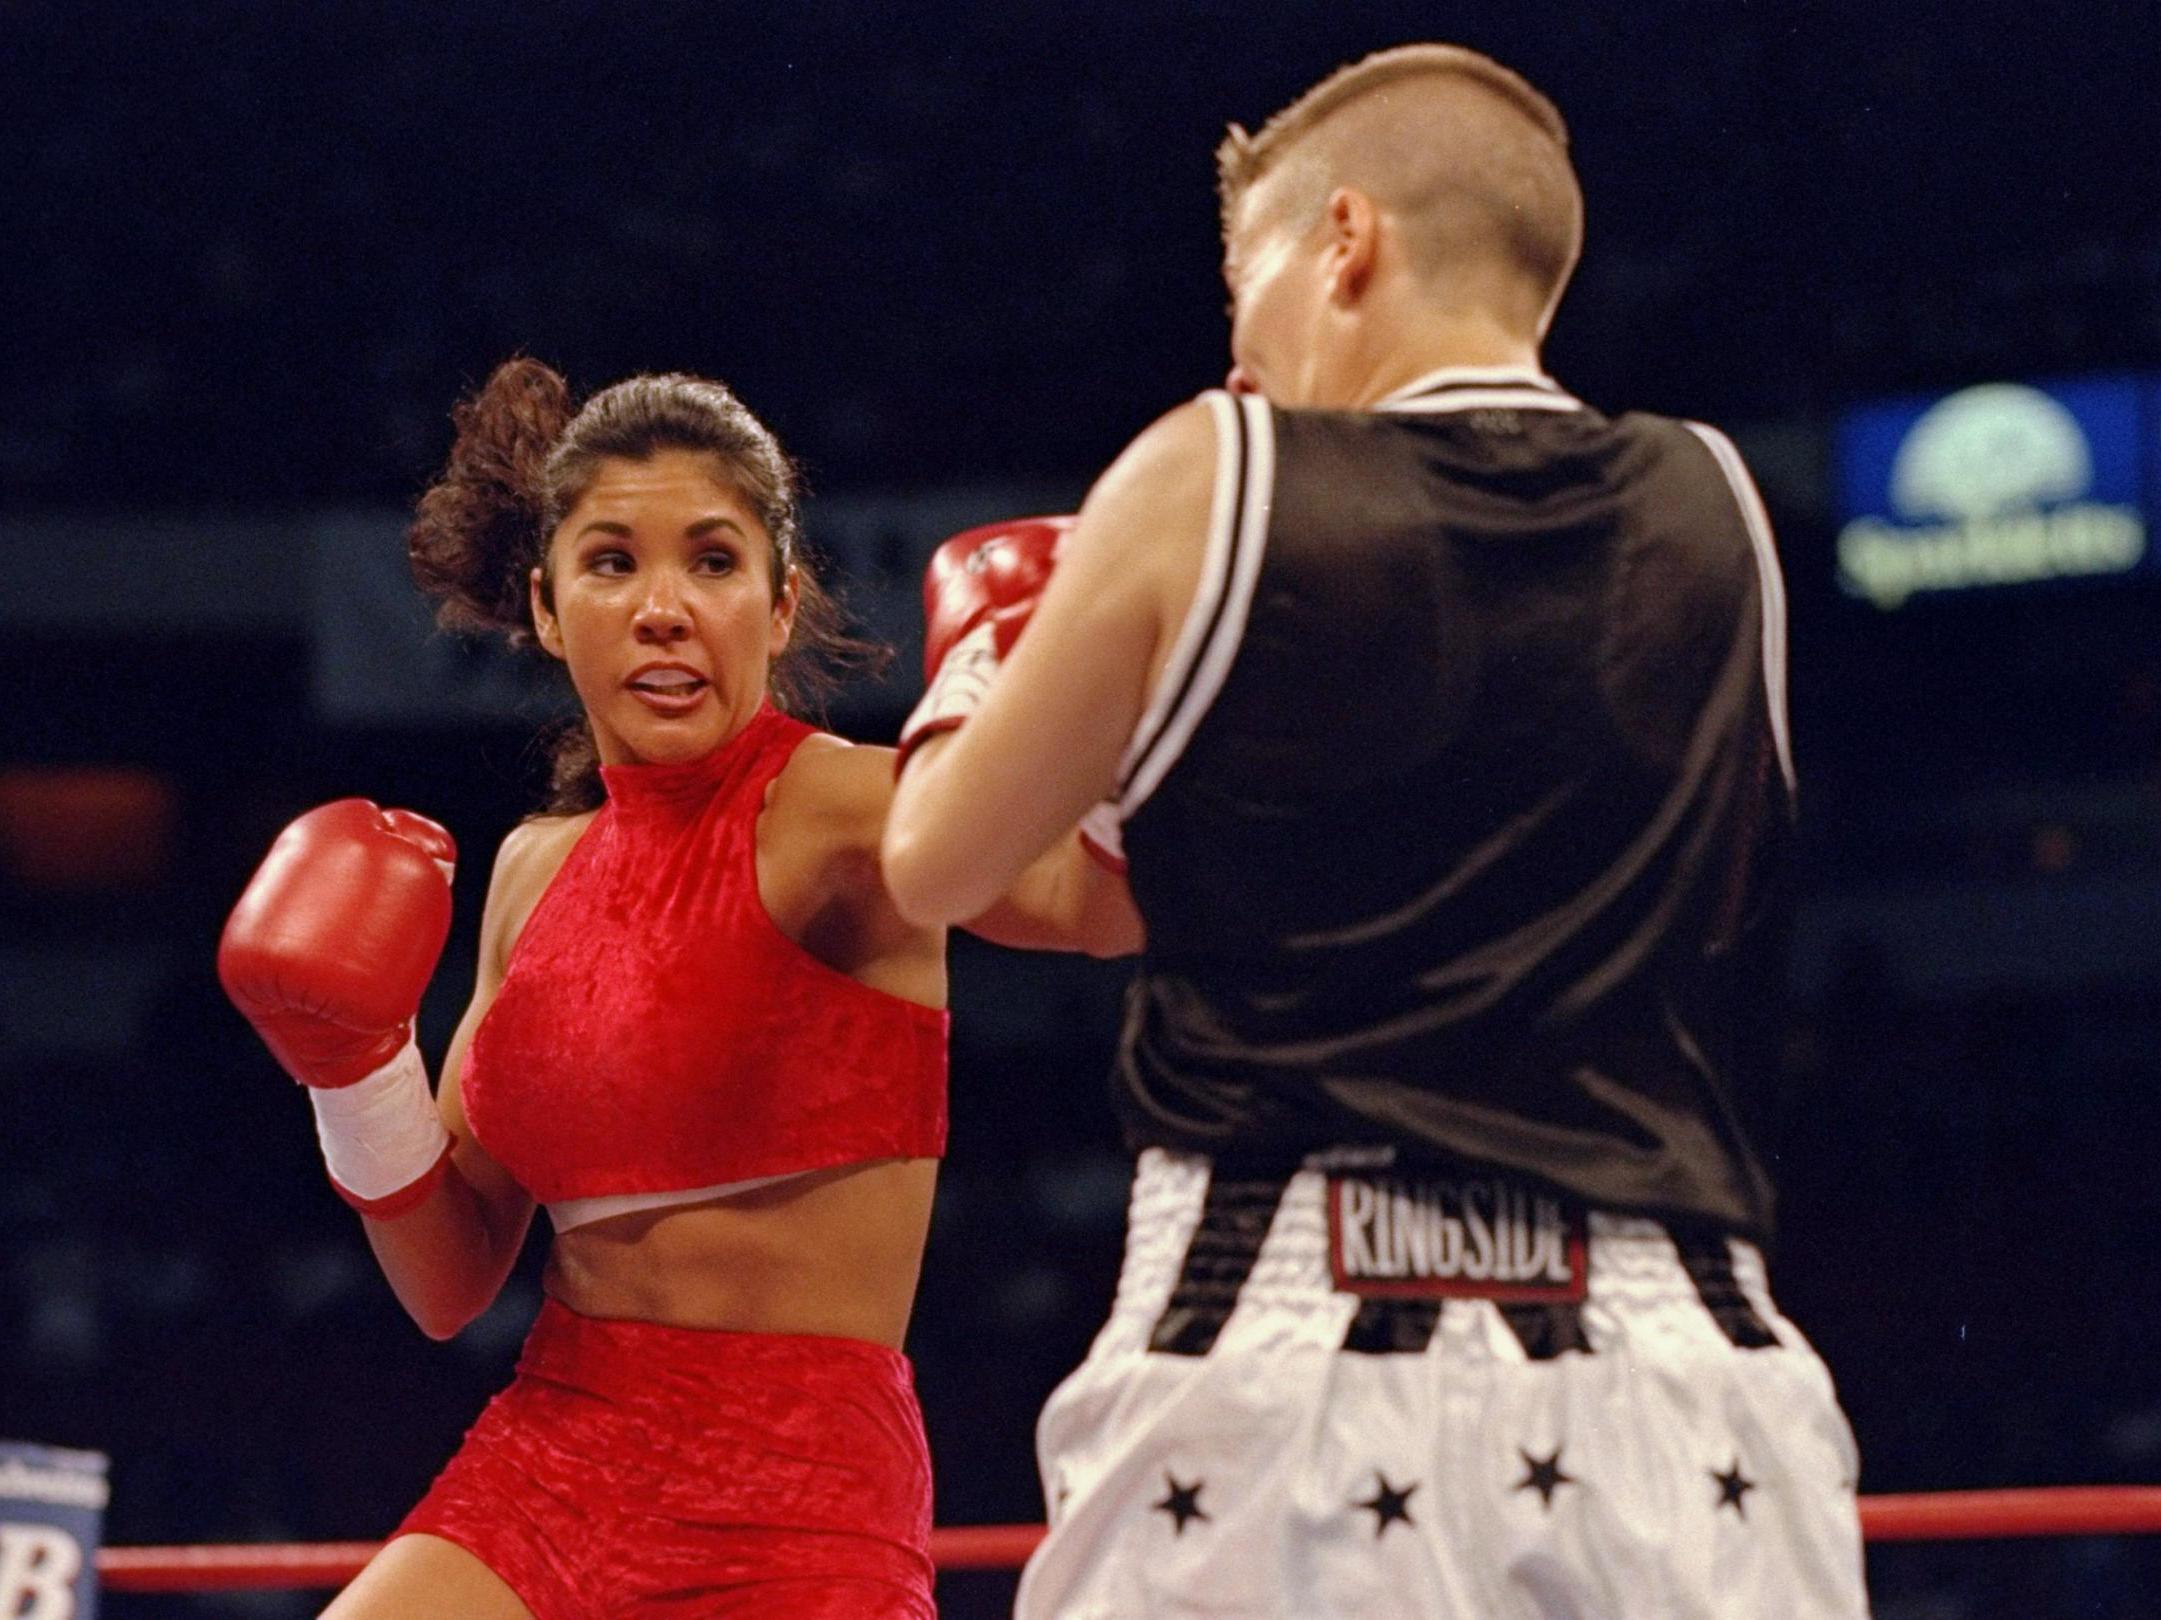 Mia St John during her early boxing days